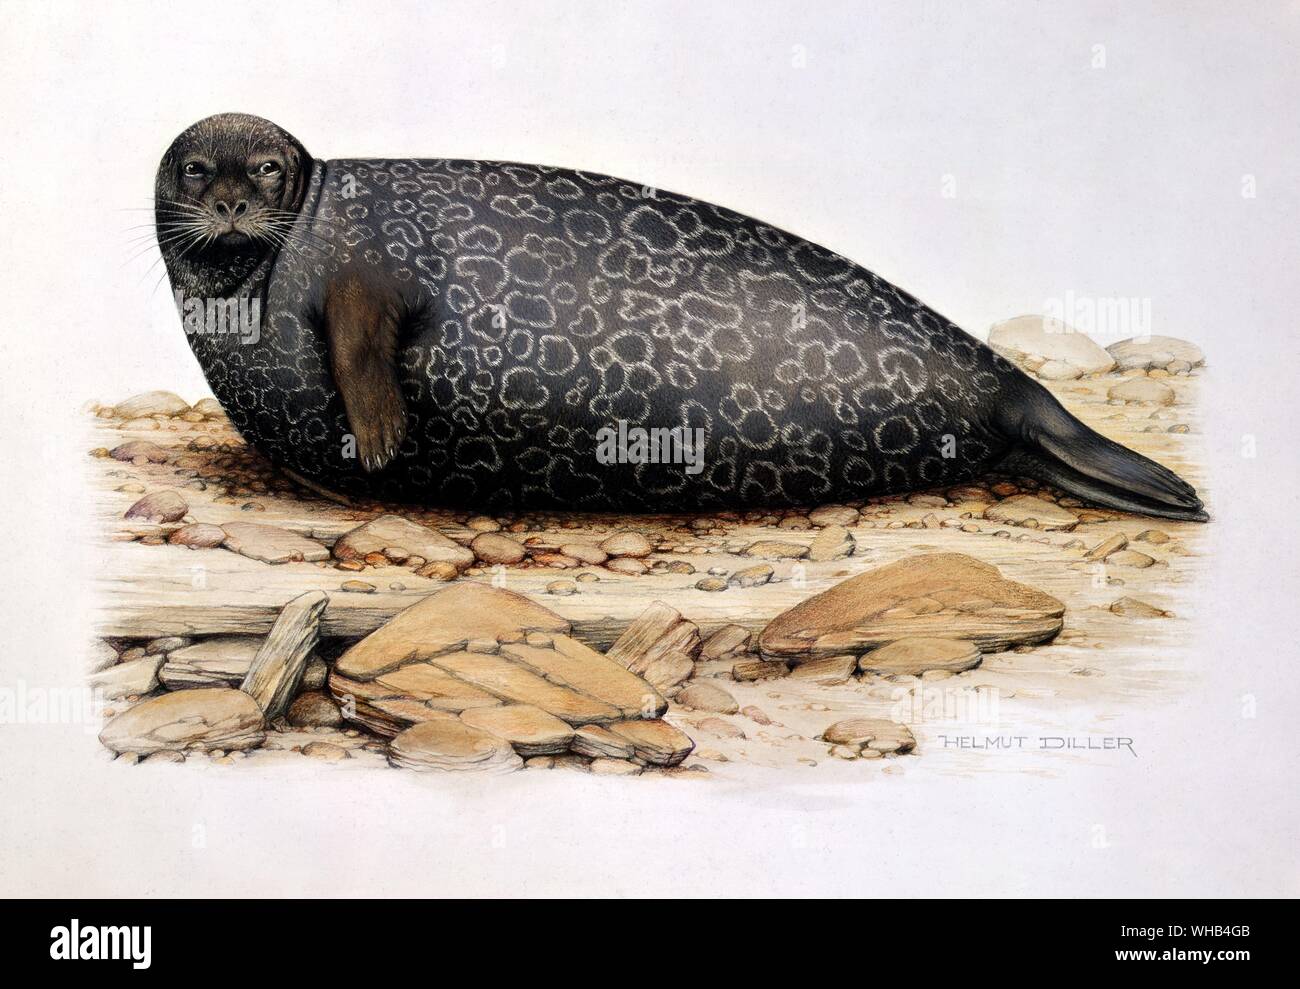 Common seal - subspecies from freshwater Lake Saimaa, Finland - drawing by Helmut Diller. Stock Photo